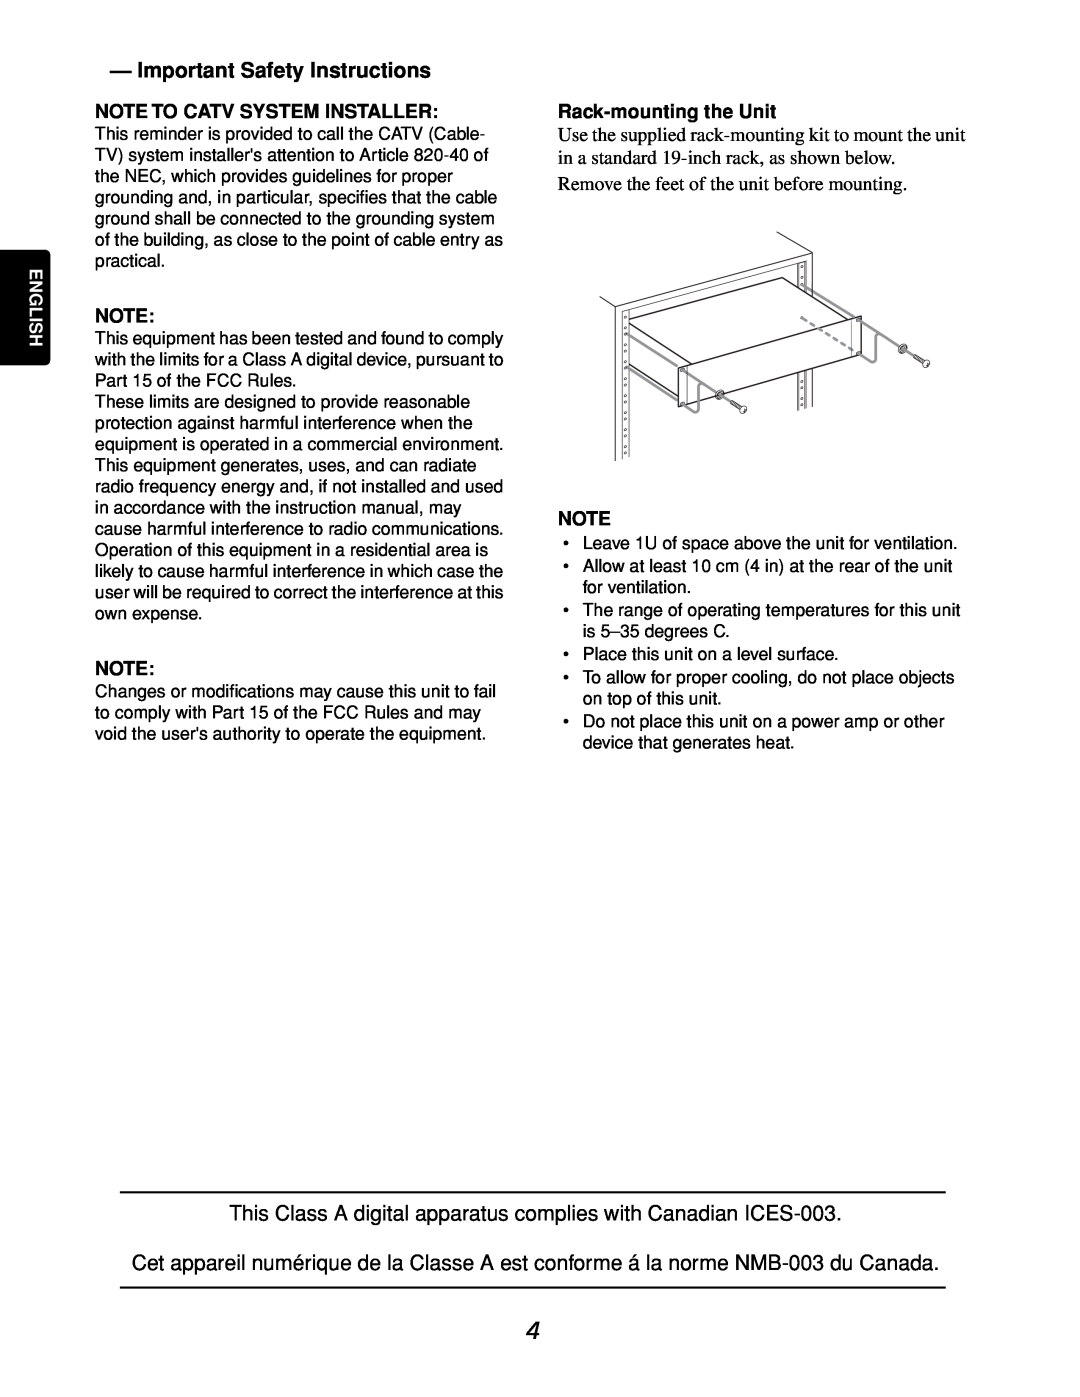 Marantz CDR632 manual Important Safety Instructions, Note To Catv System Installer, Rack-mountingthe Unit 